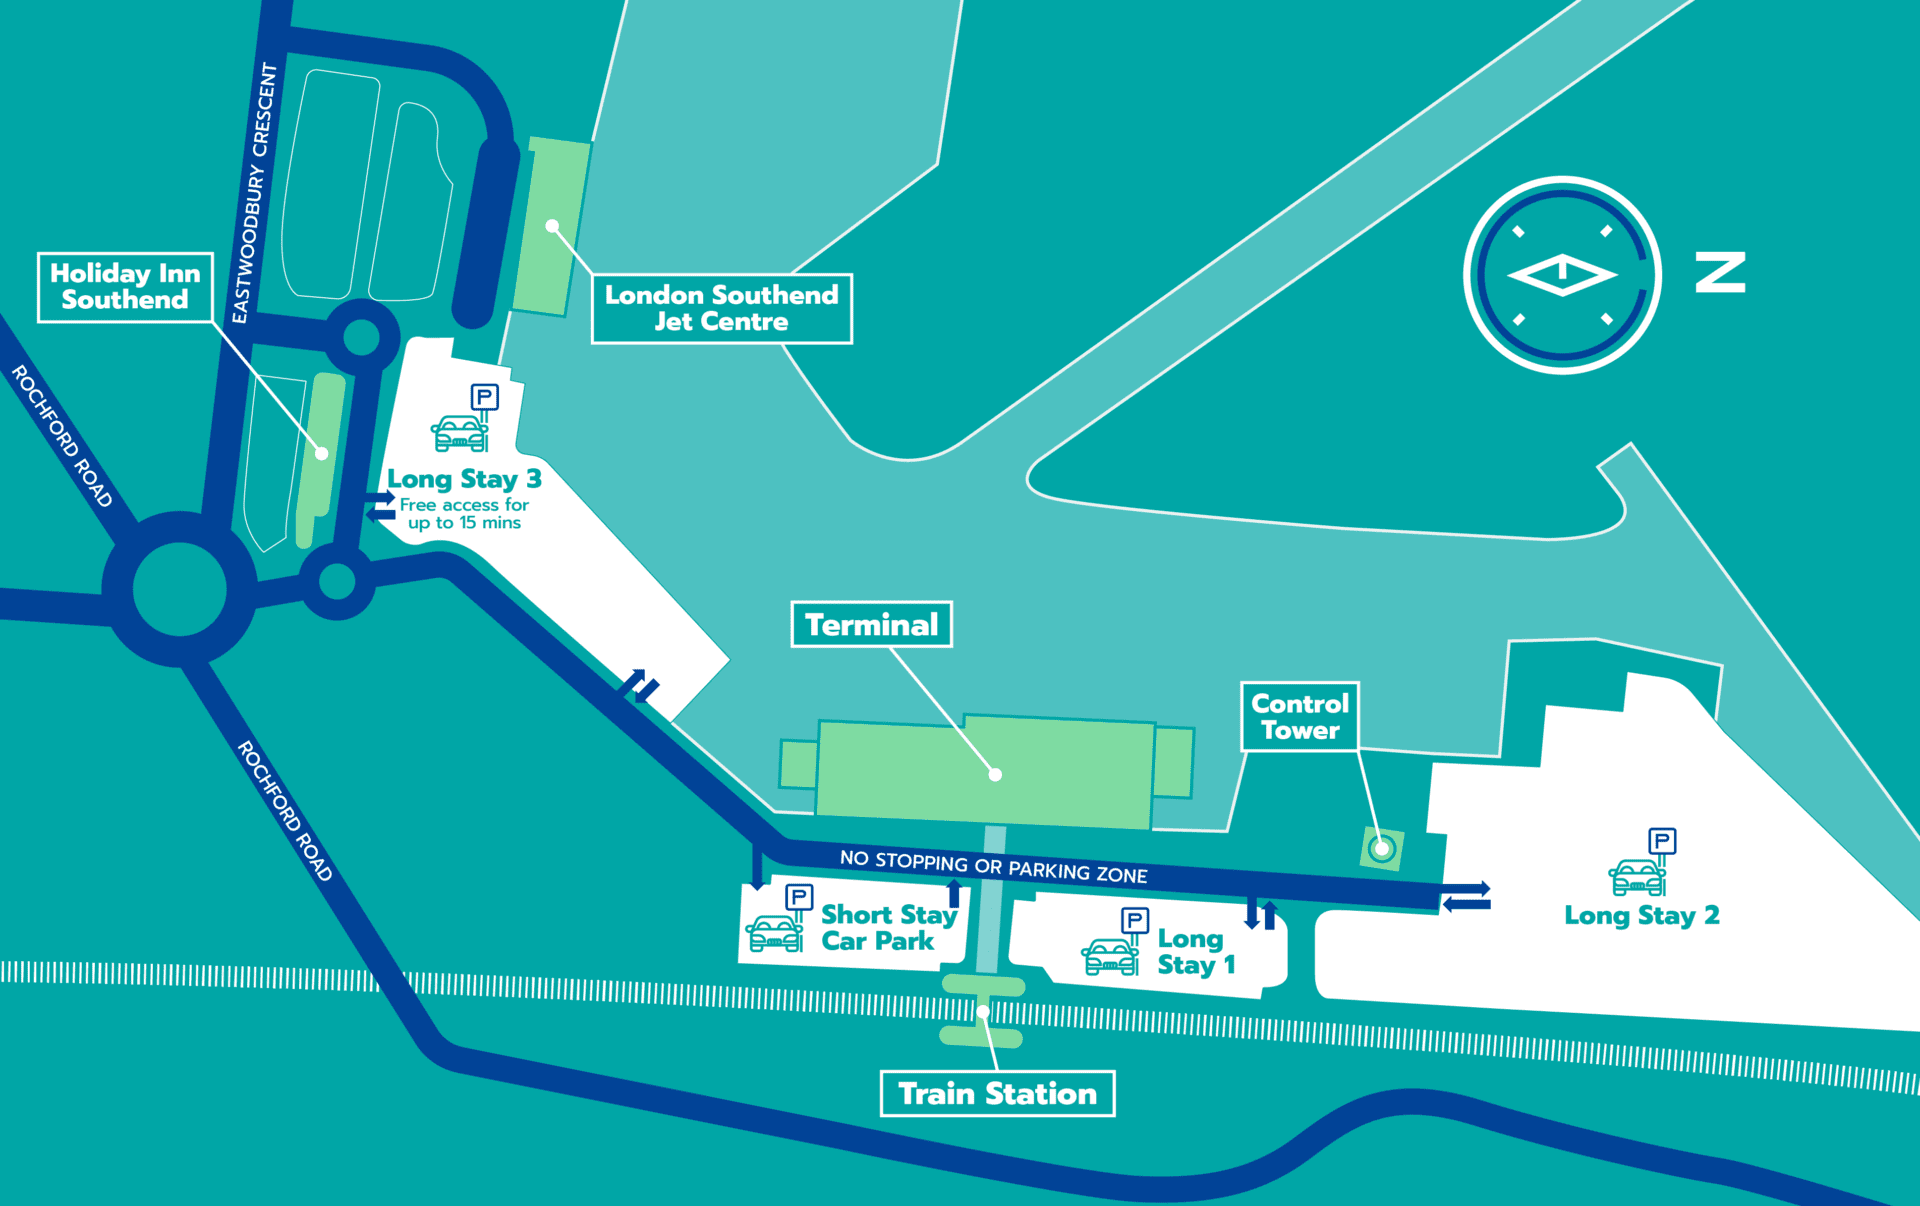 Book official onsite parking at London Southend Airport. A map of all car parks, including Short Stay, Long Say 1, Long Stay 2 and Long Stay 3.